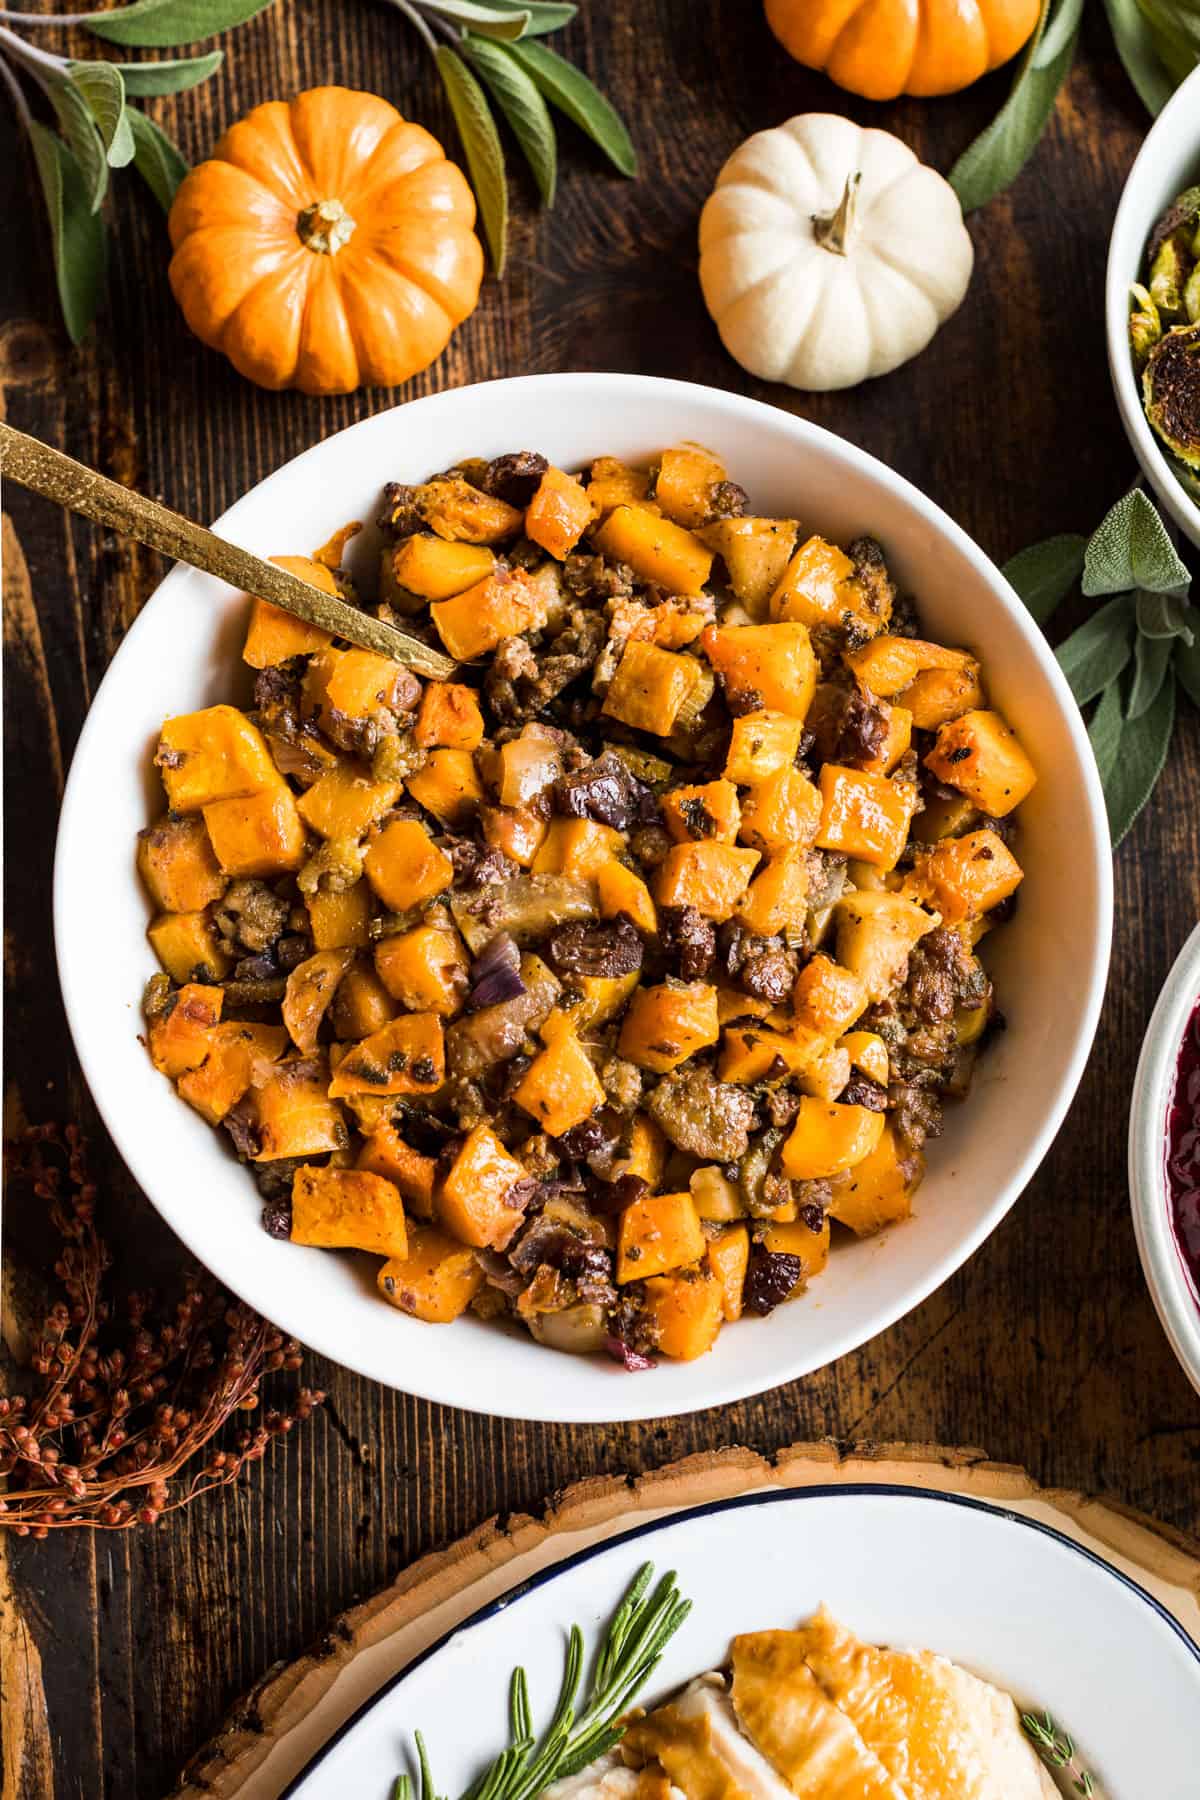 A bowl of butternut stuffing in the center surrounded by decorative pumpkins and a platter of sliced turkey.